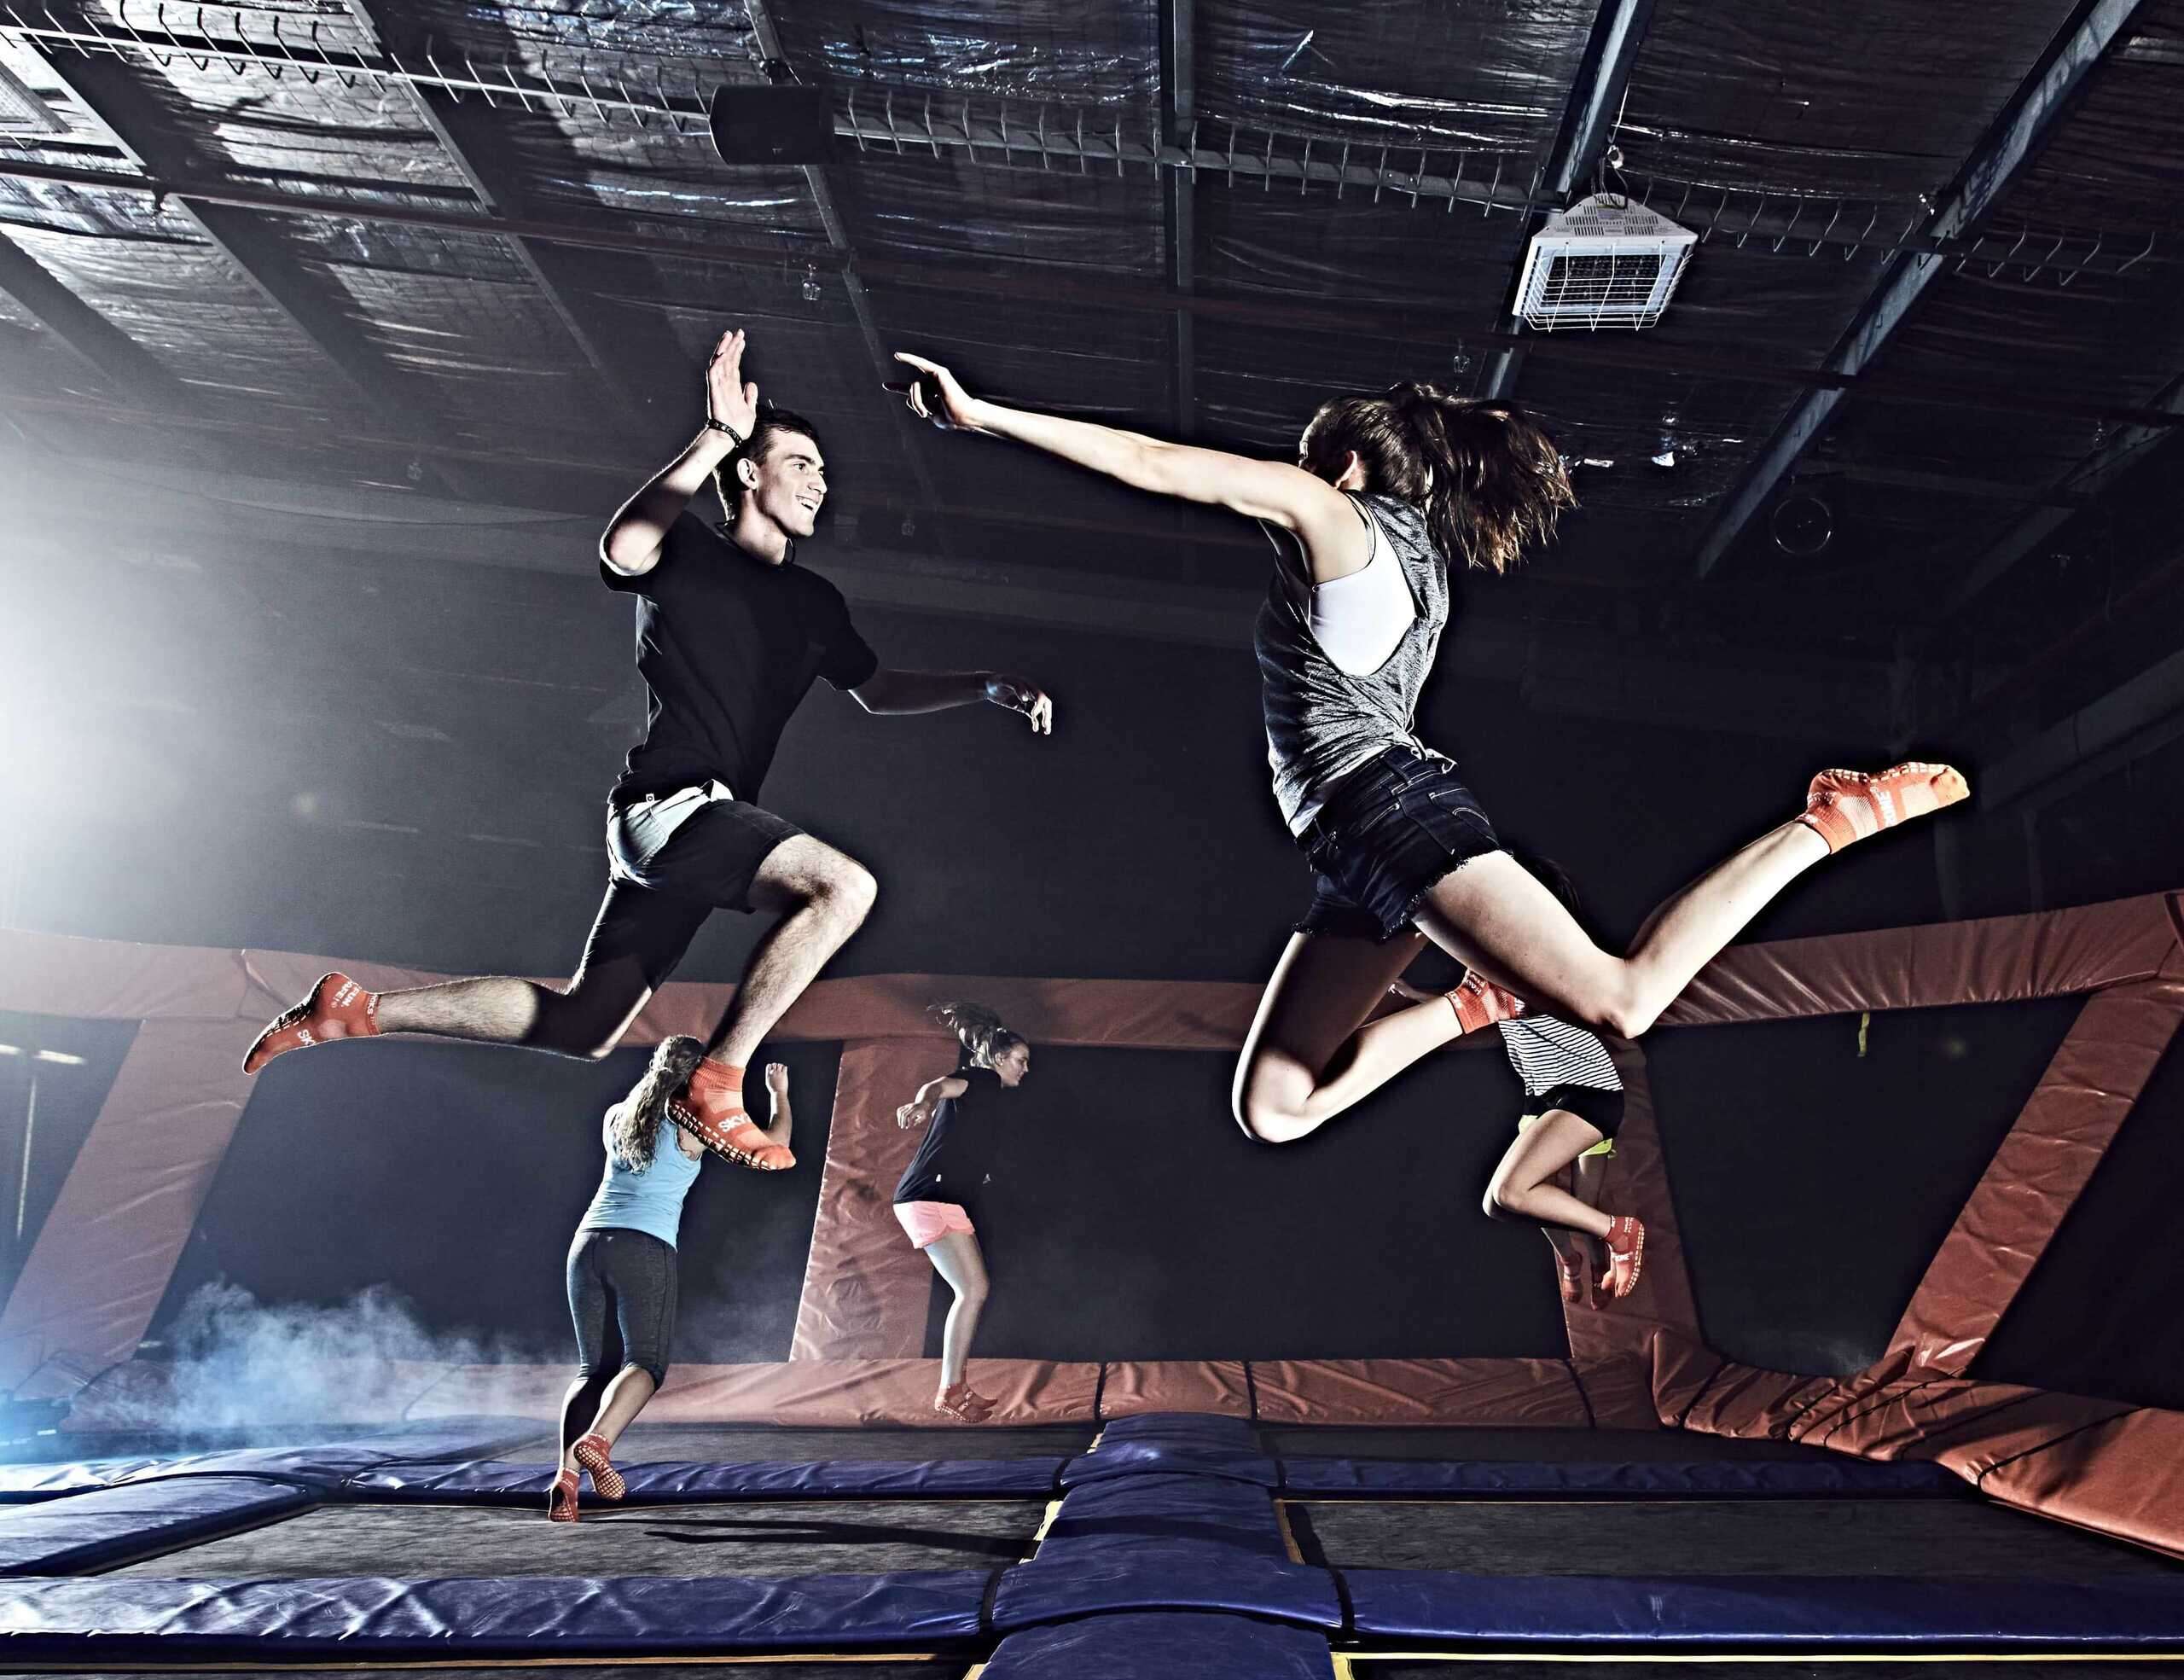 New trampoline park to host grand opening party, May 7